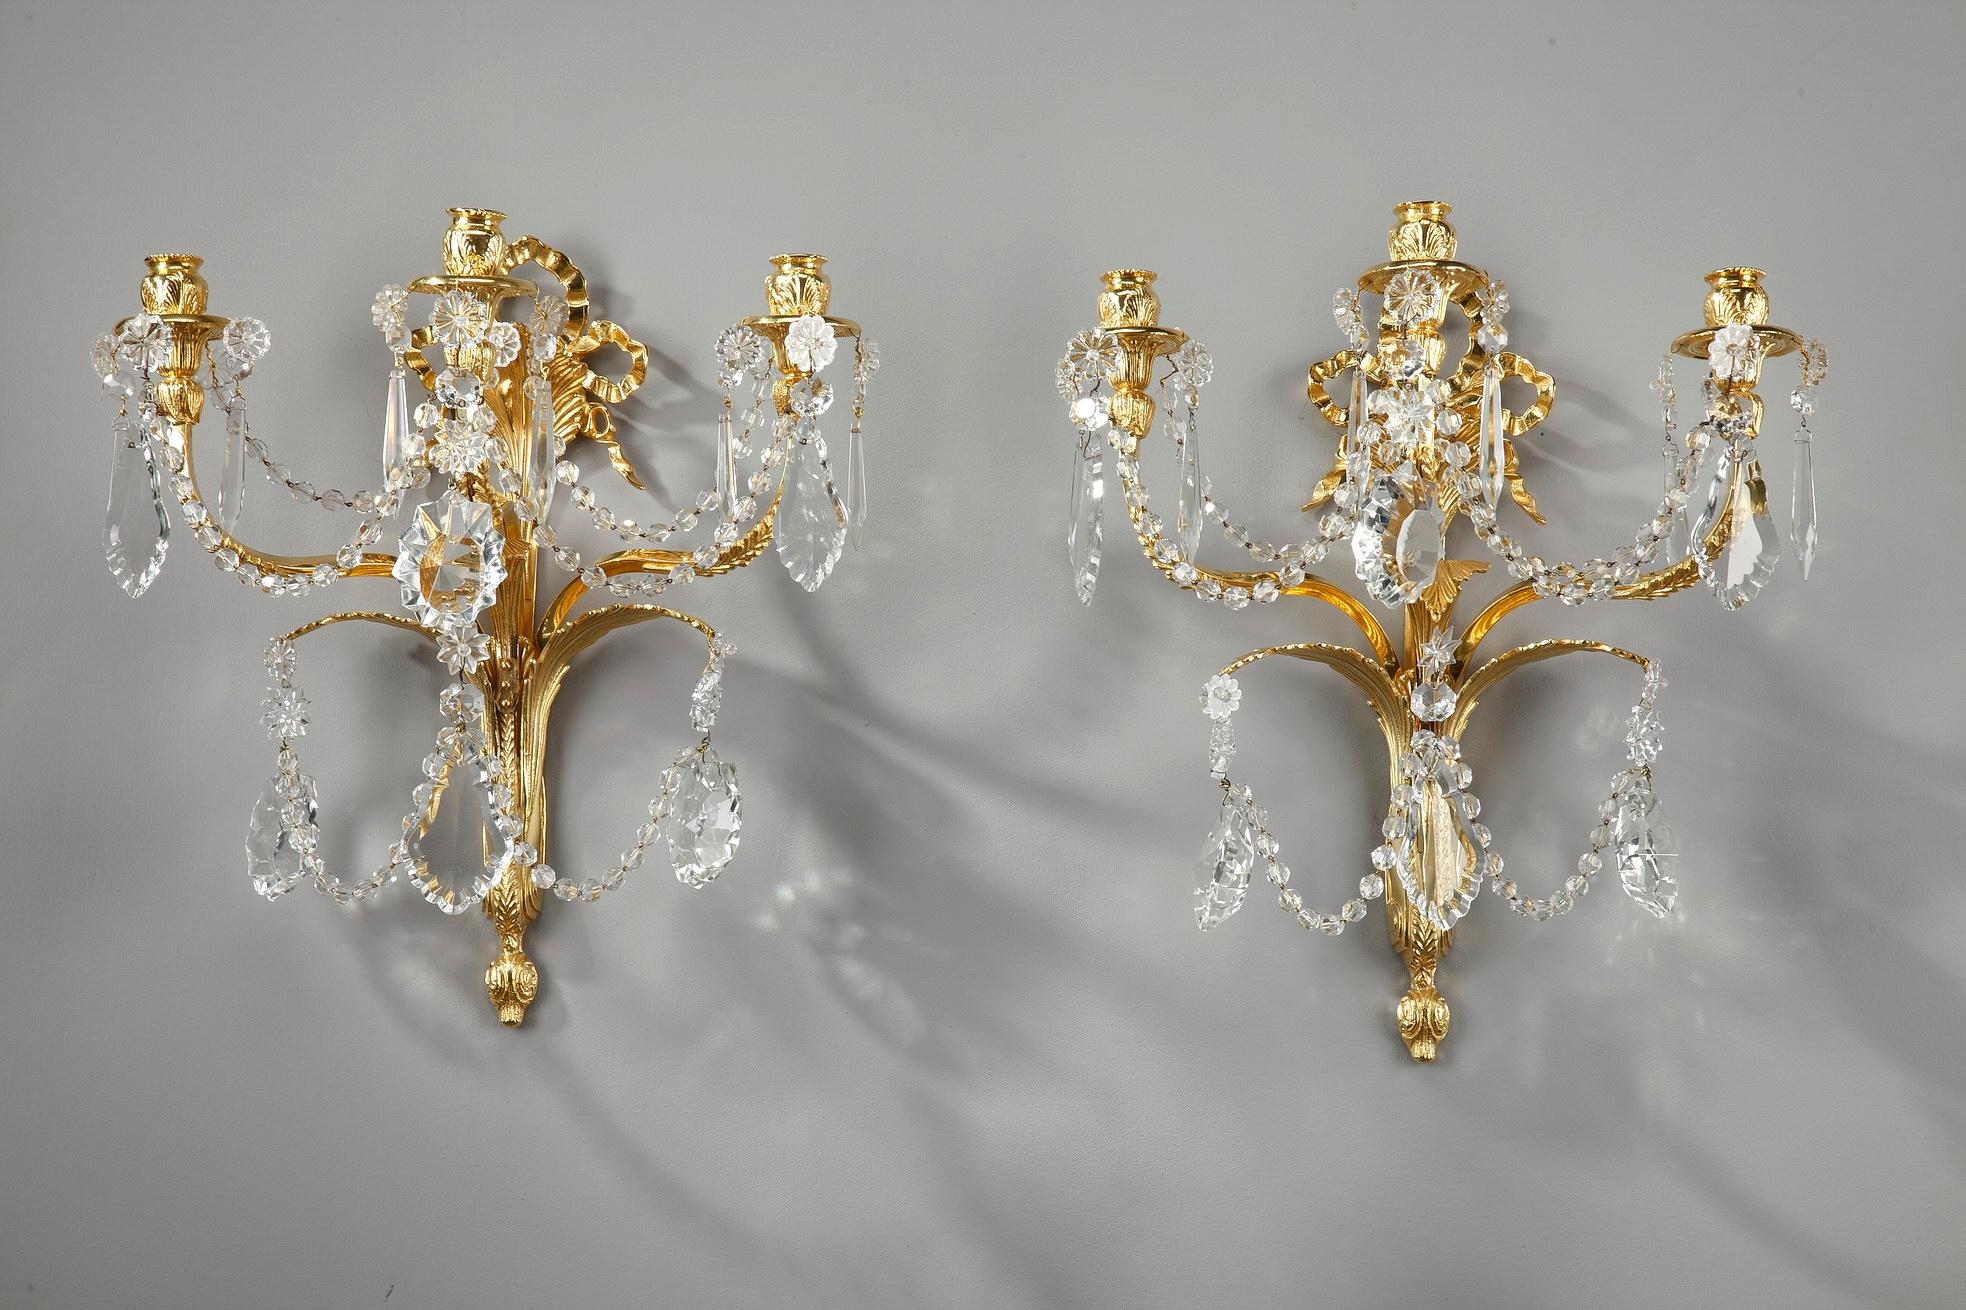 Pair of neoclassical wall lights sconces crafted of gilt bronze, with three-light. Each sconce is richly decorated with crystal drops, rosettes and drop-hung drippans. The ormolu fixture is chiseled with Classic Louis XVI decoration, including a